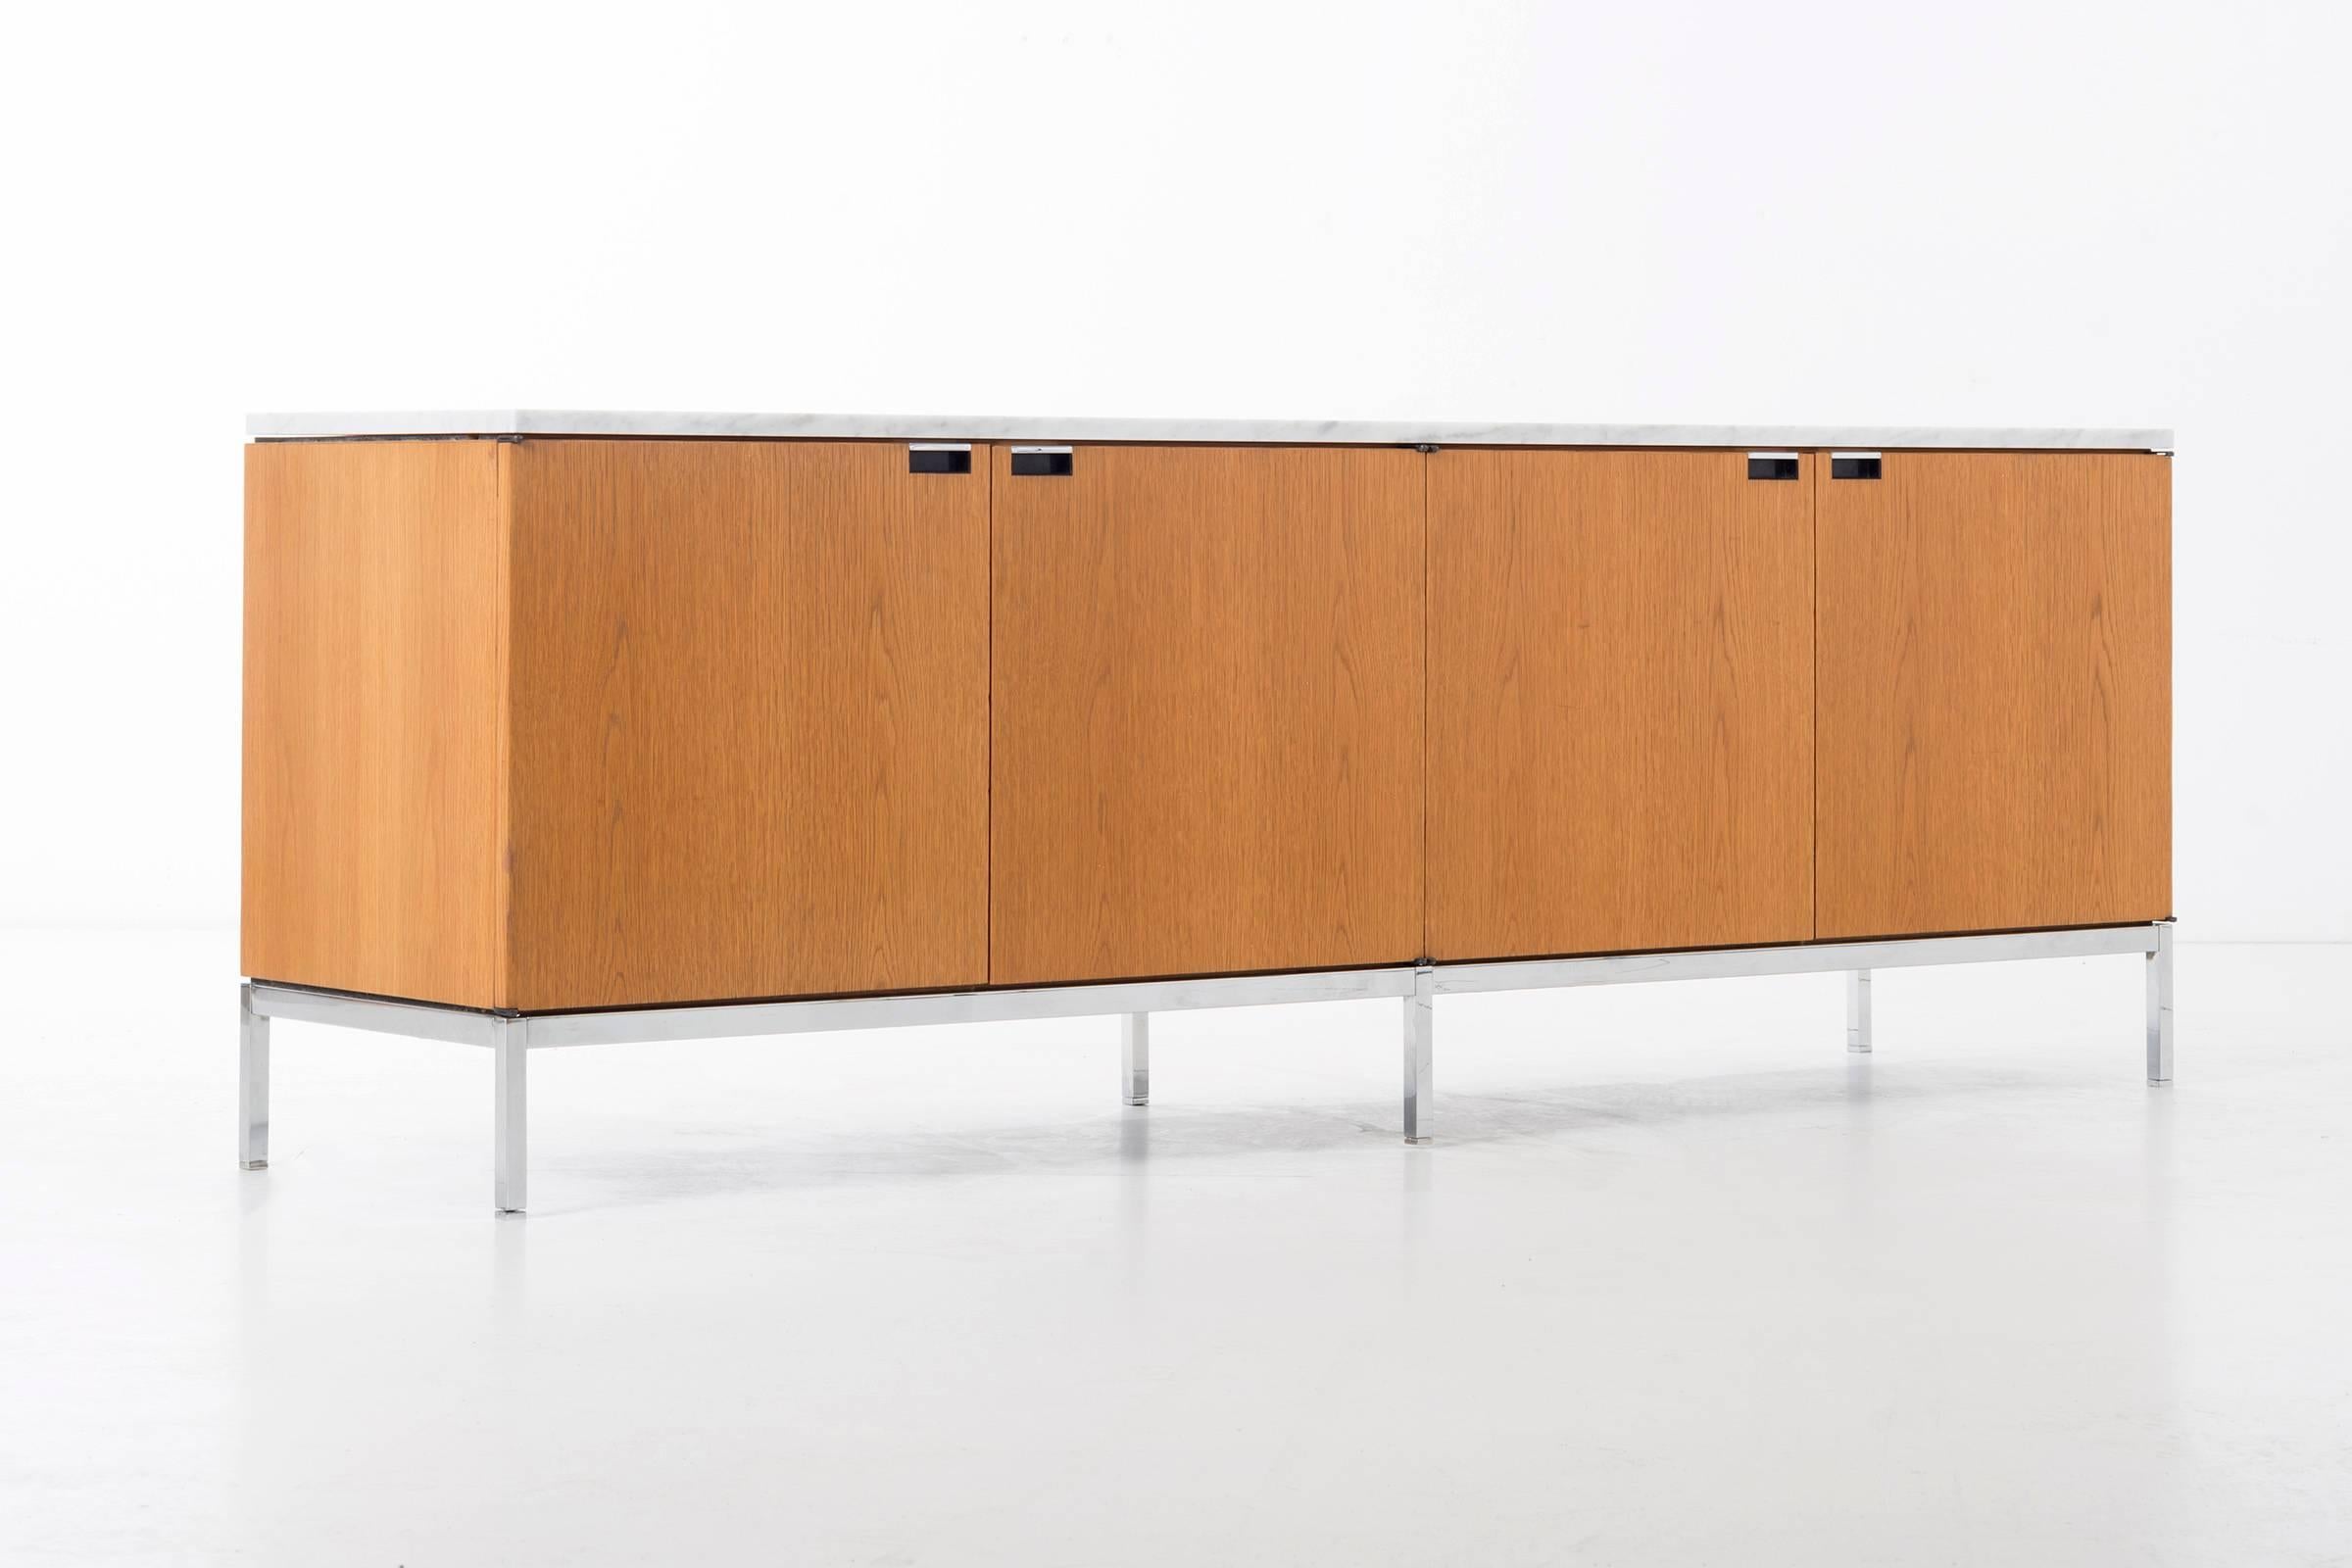 Florence Knoll white oak credenza with Carrara marble top.
Features 8 doors with cutout pulls, 4 separate storage compartments with adjustable shelves  
Solid tubular base with adjustable feet.
[label Knoll on underside]    